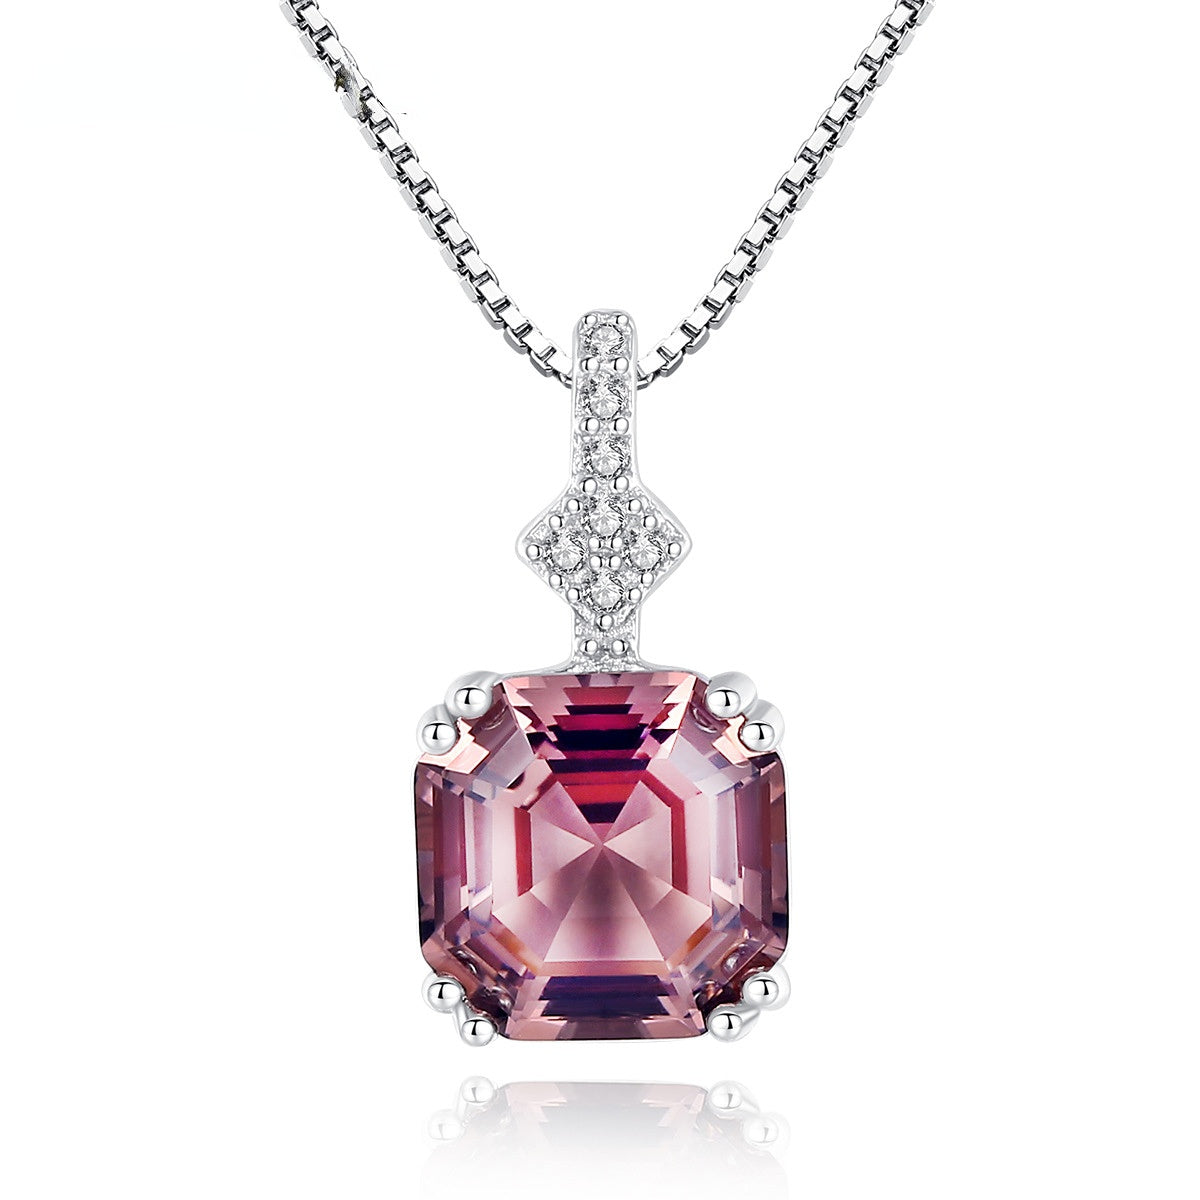 Gemstonely-Morganite Pendant Necklace with Silver Box Chain - Fashionable and Versatile 925 Sterling Silver Jewelry for Women